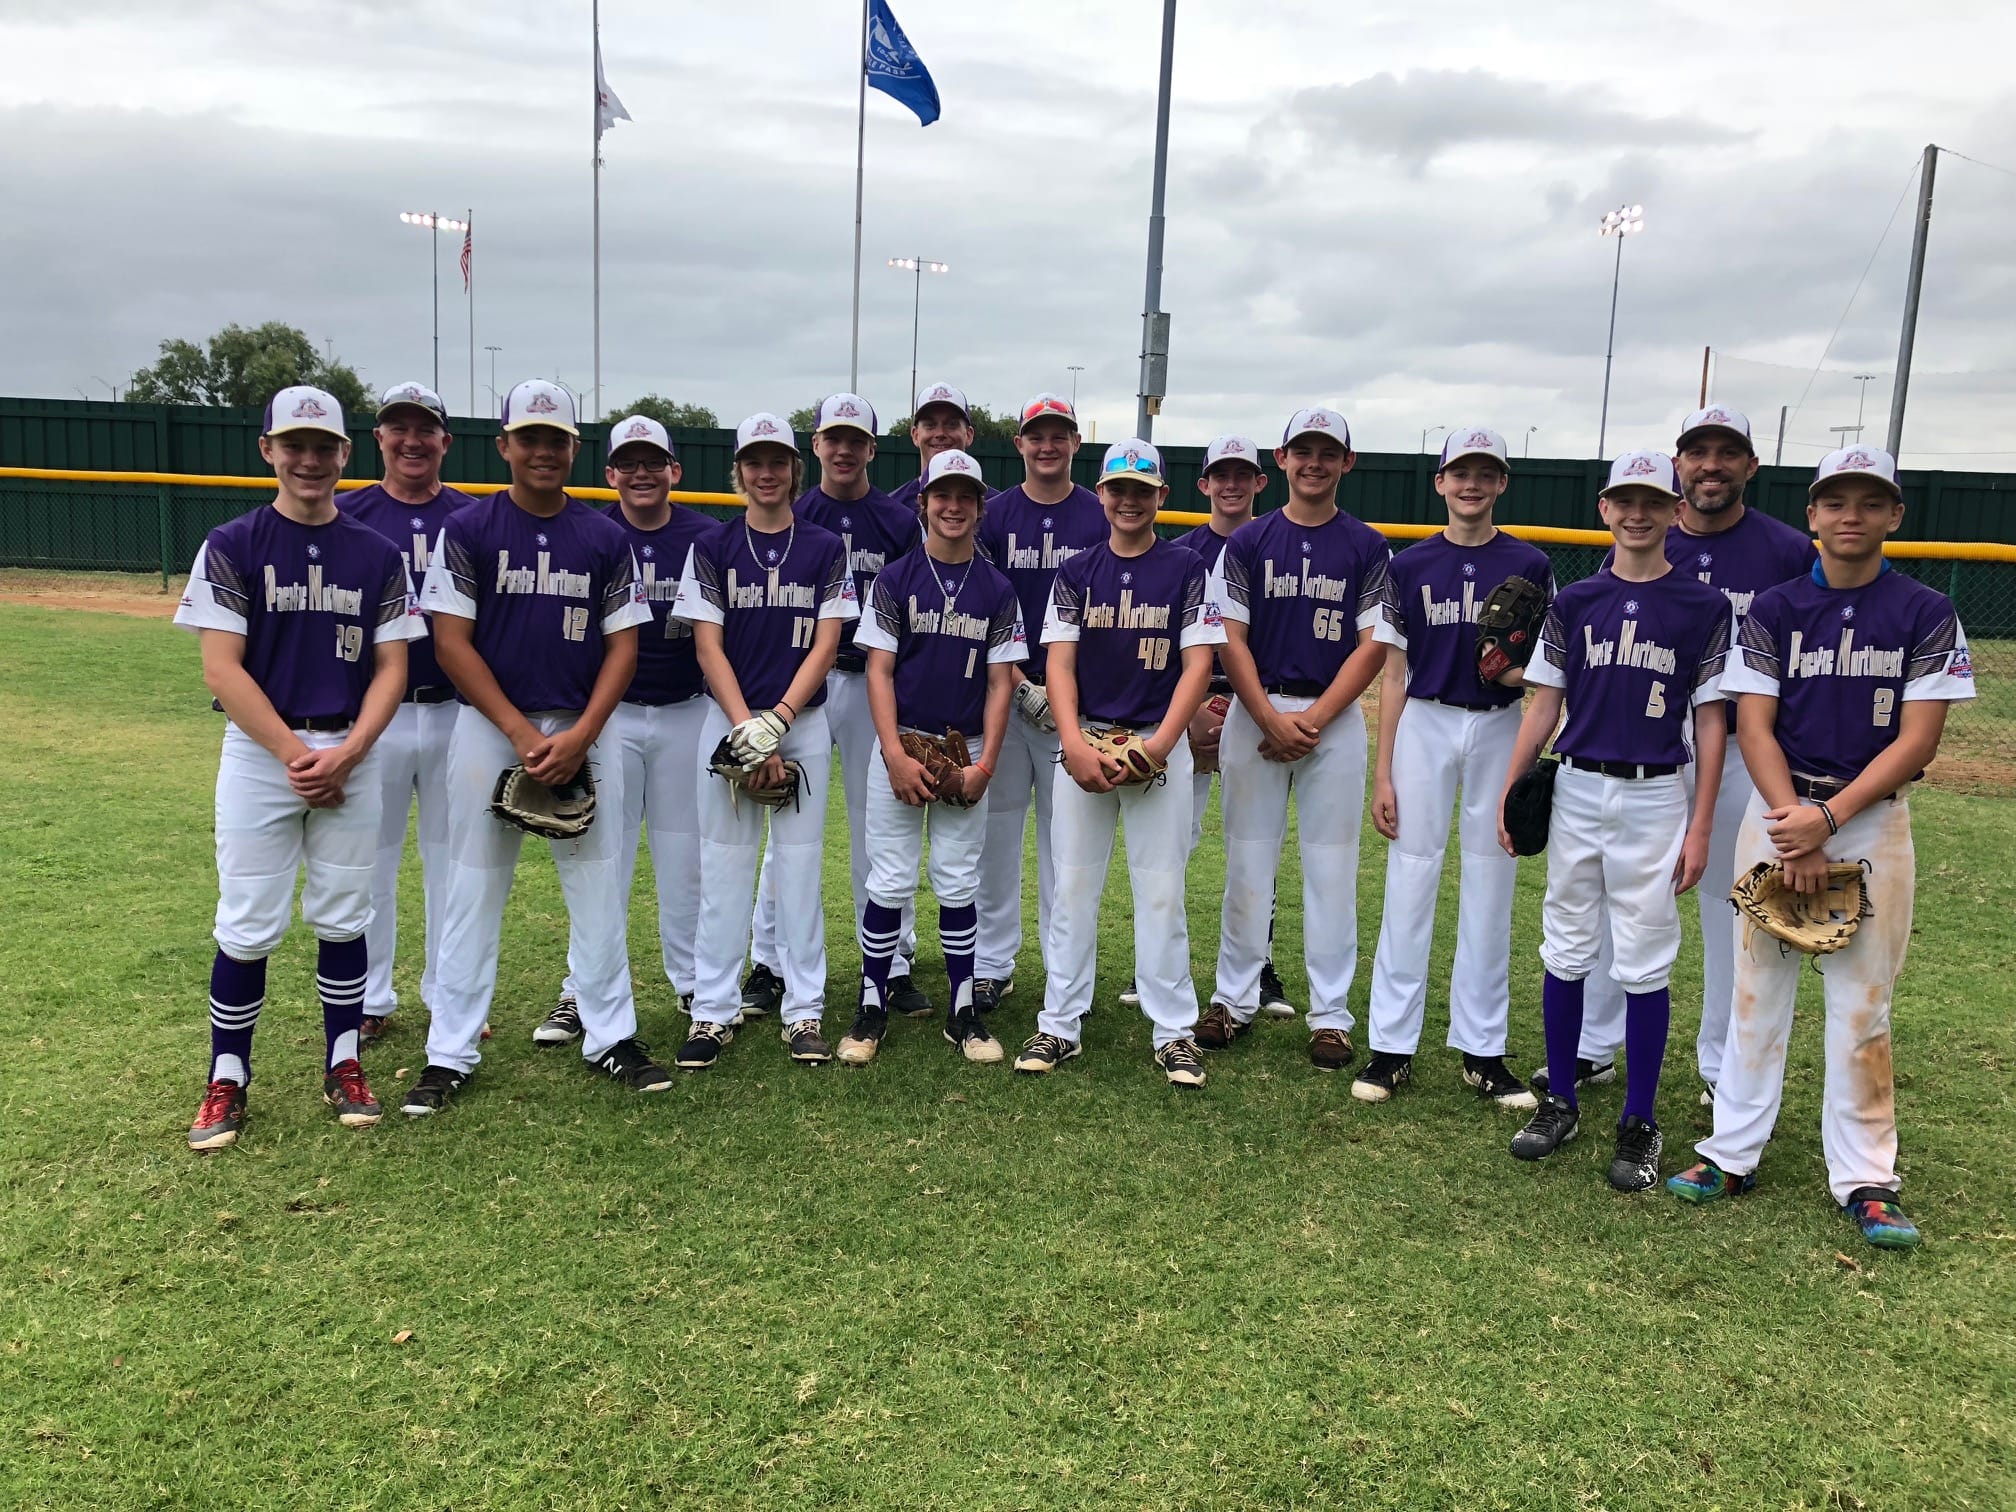 KWRL Hit Squad 14-year-old Babe Ruth team at the 2018 World Series in Eagle Pass, Texas.